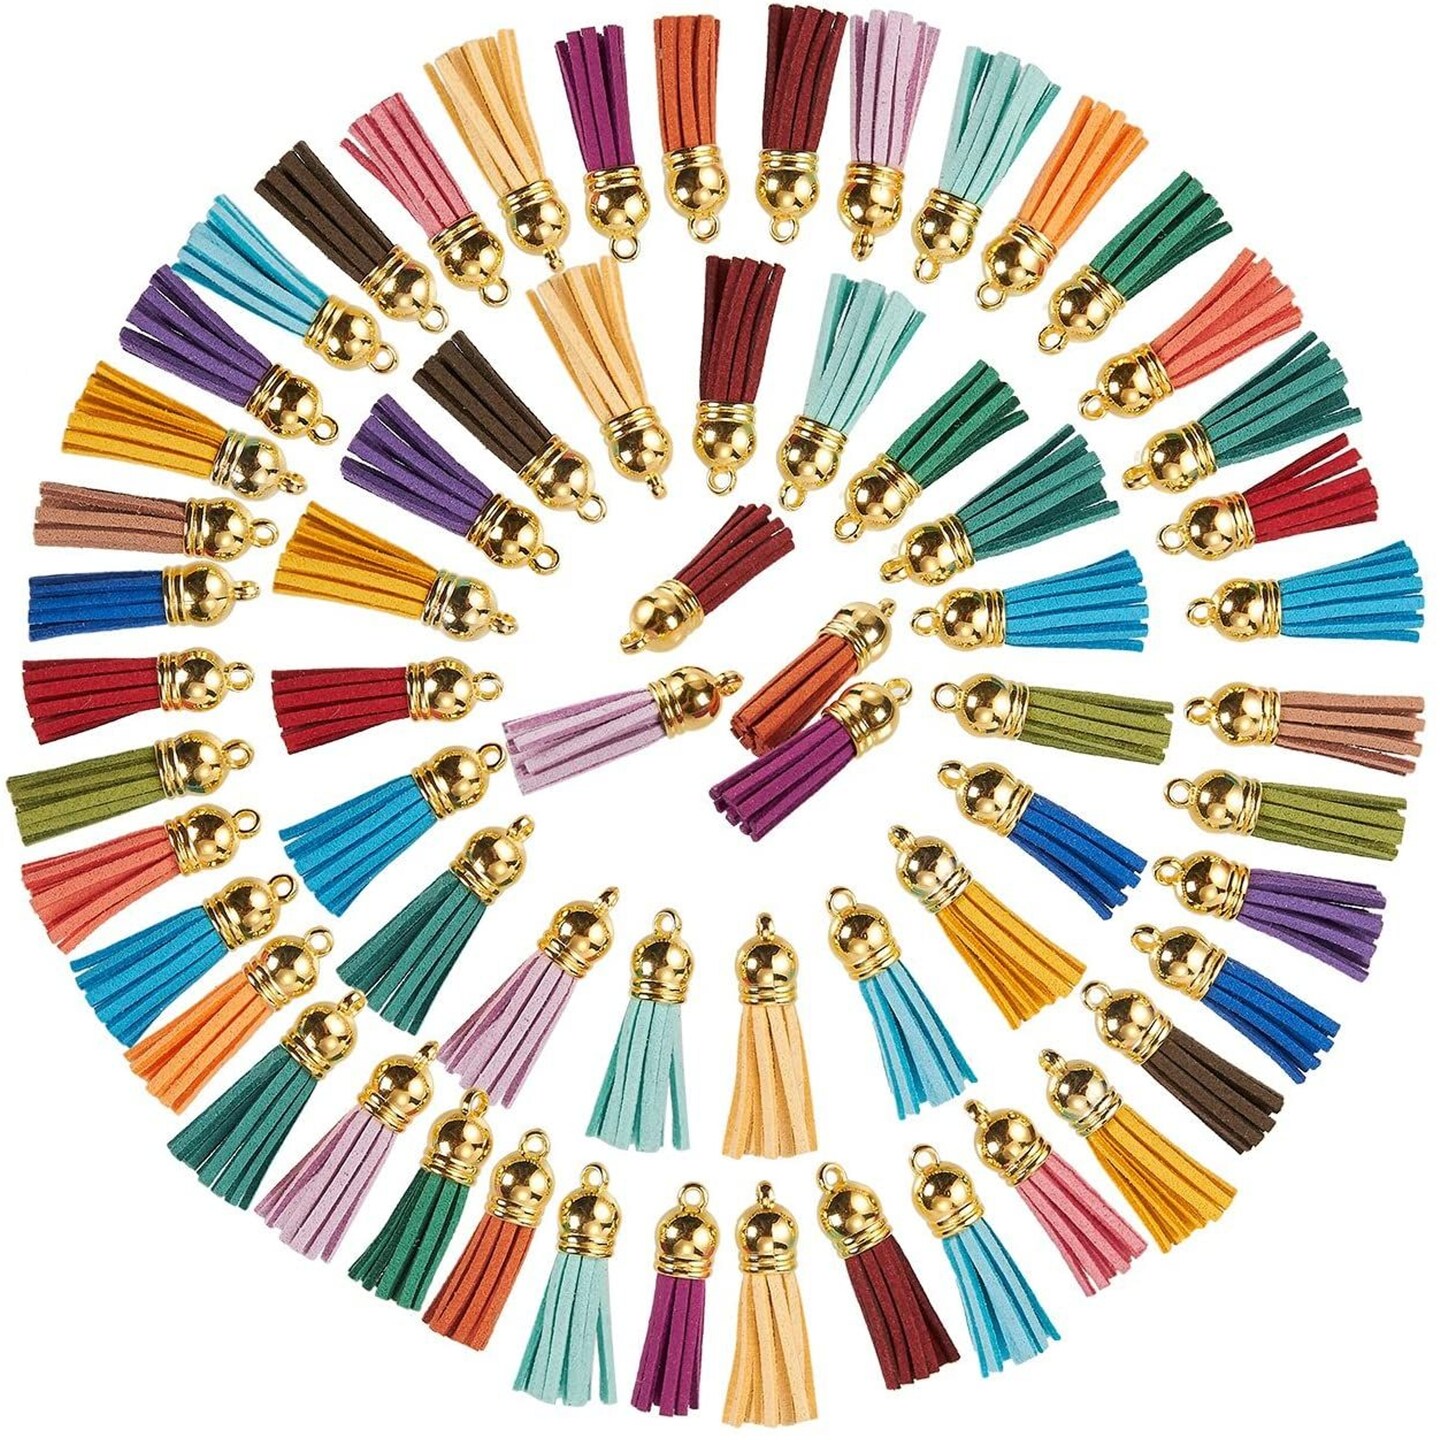 Juvale Leather Tassel Keychain - 100-Piece Faux Leather Suede Tassel Charm,  Multi-Color, 20 Assorted Colors (1.5 Inches)